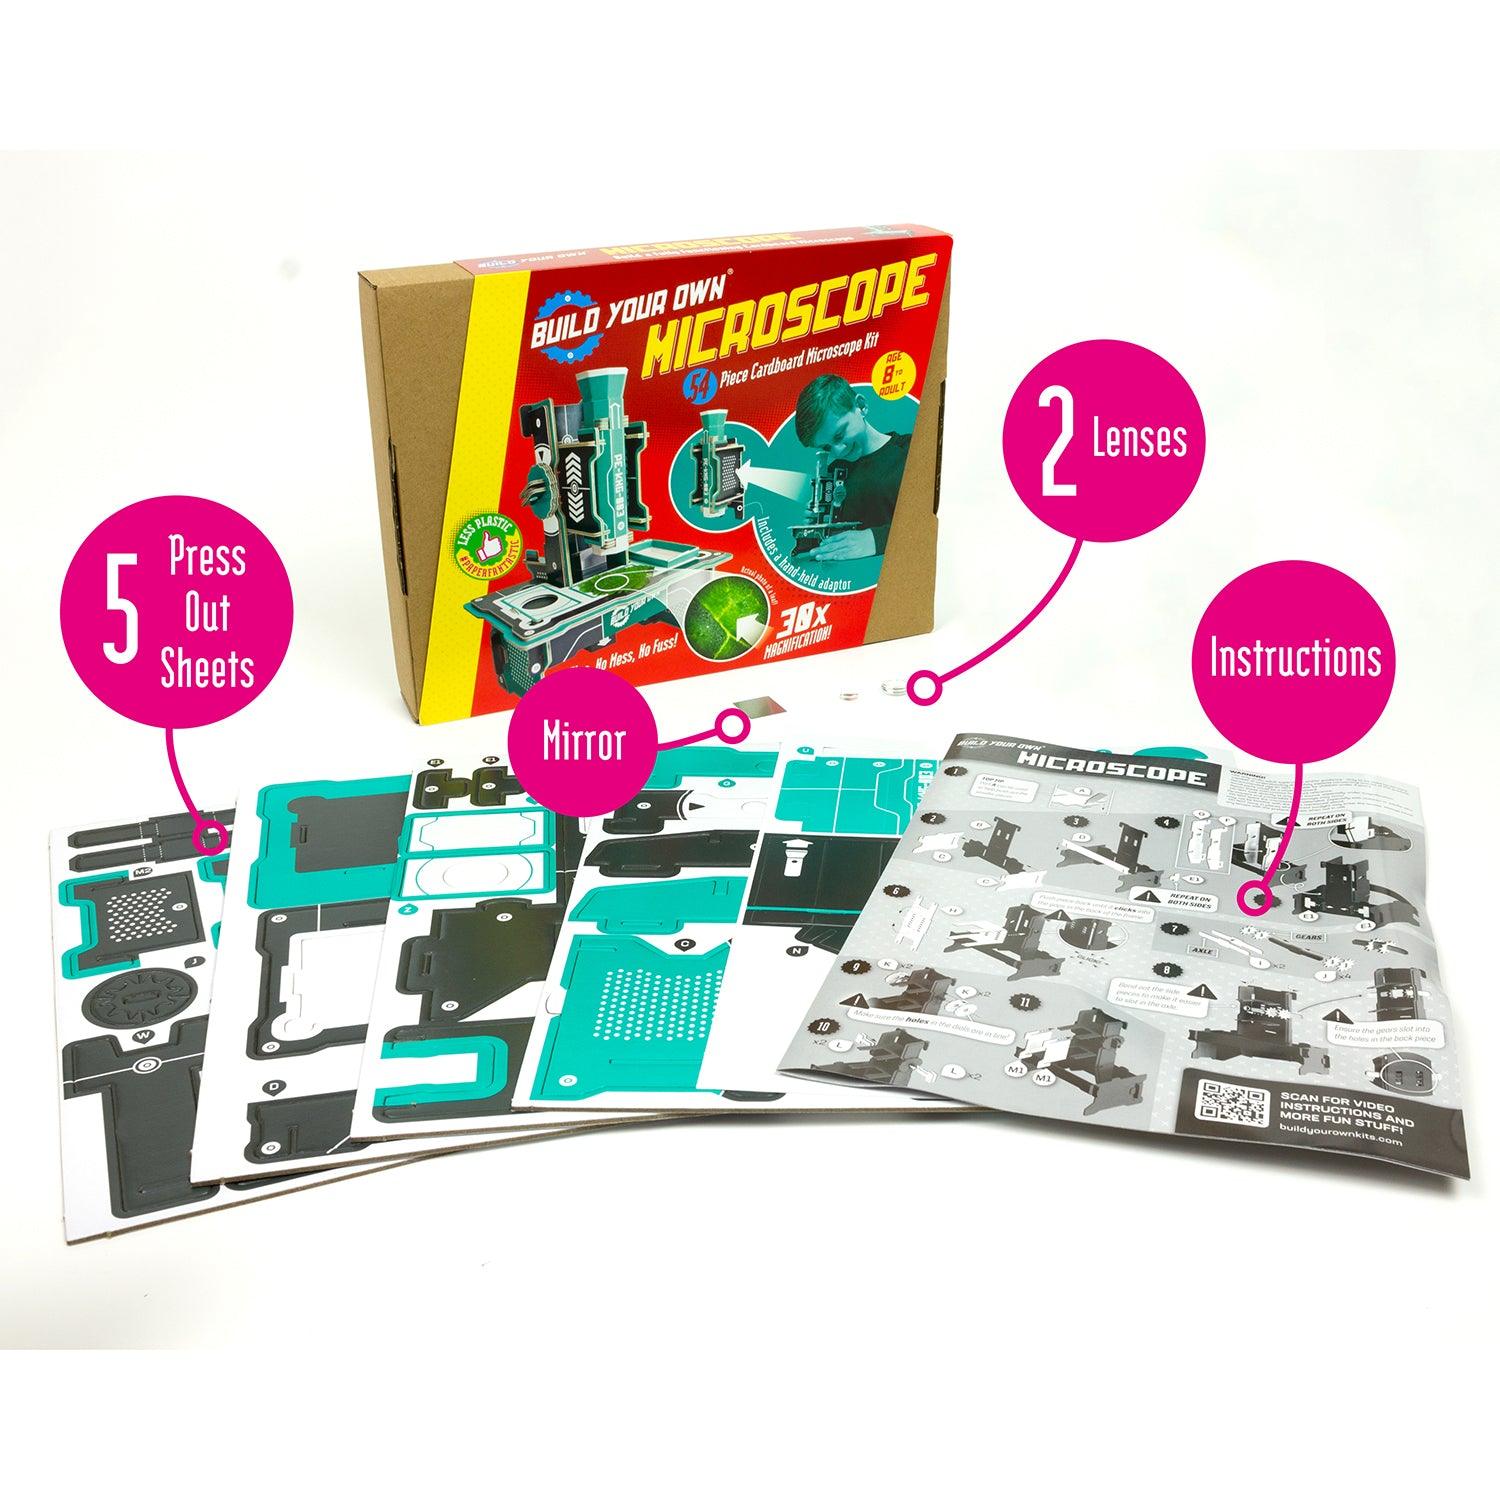 Build Your Own Microscope Kit - Kits - Science Museum Shop